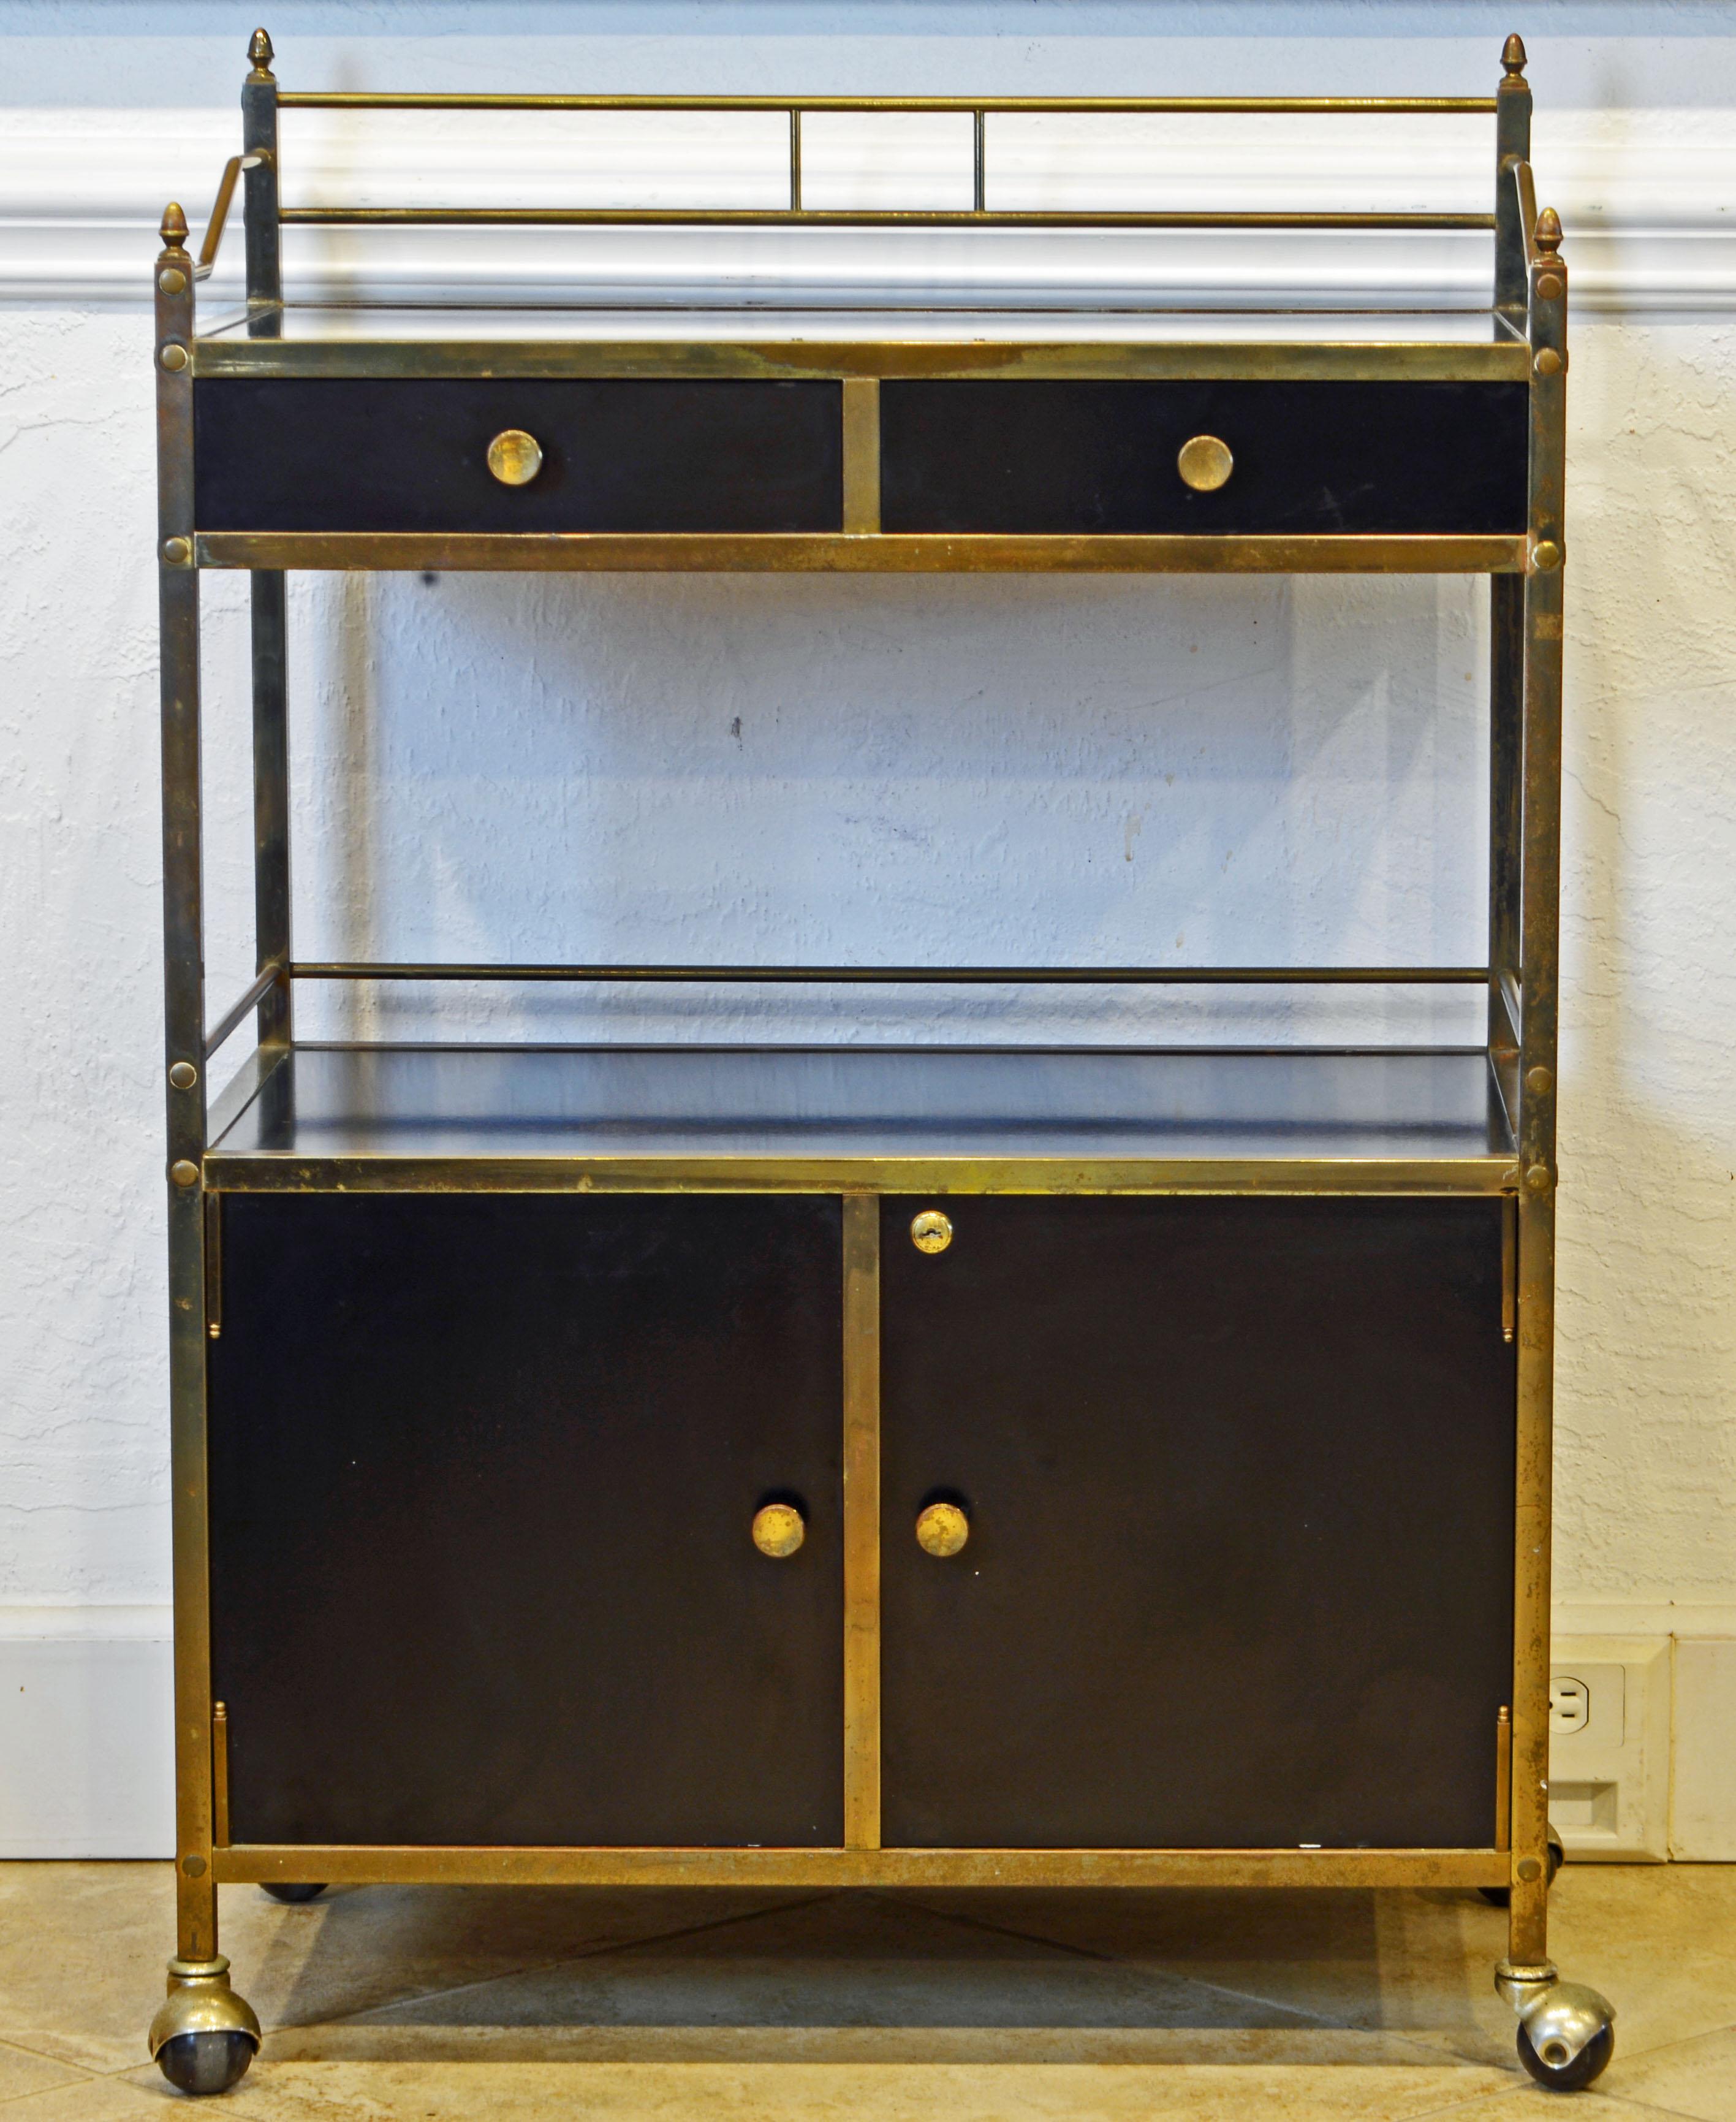 This well designed bar cart or server dating to the 1960-1970 features frames of solid brass and surfaces of black lacquer or laminate in an almost Bauhaus like style. The upper rail is topped by acorn shaped finials. The lower section features a